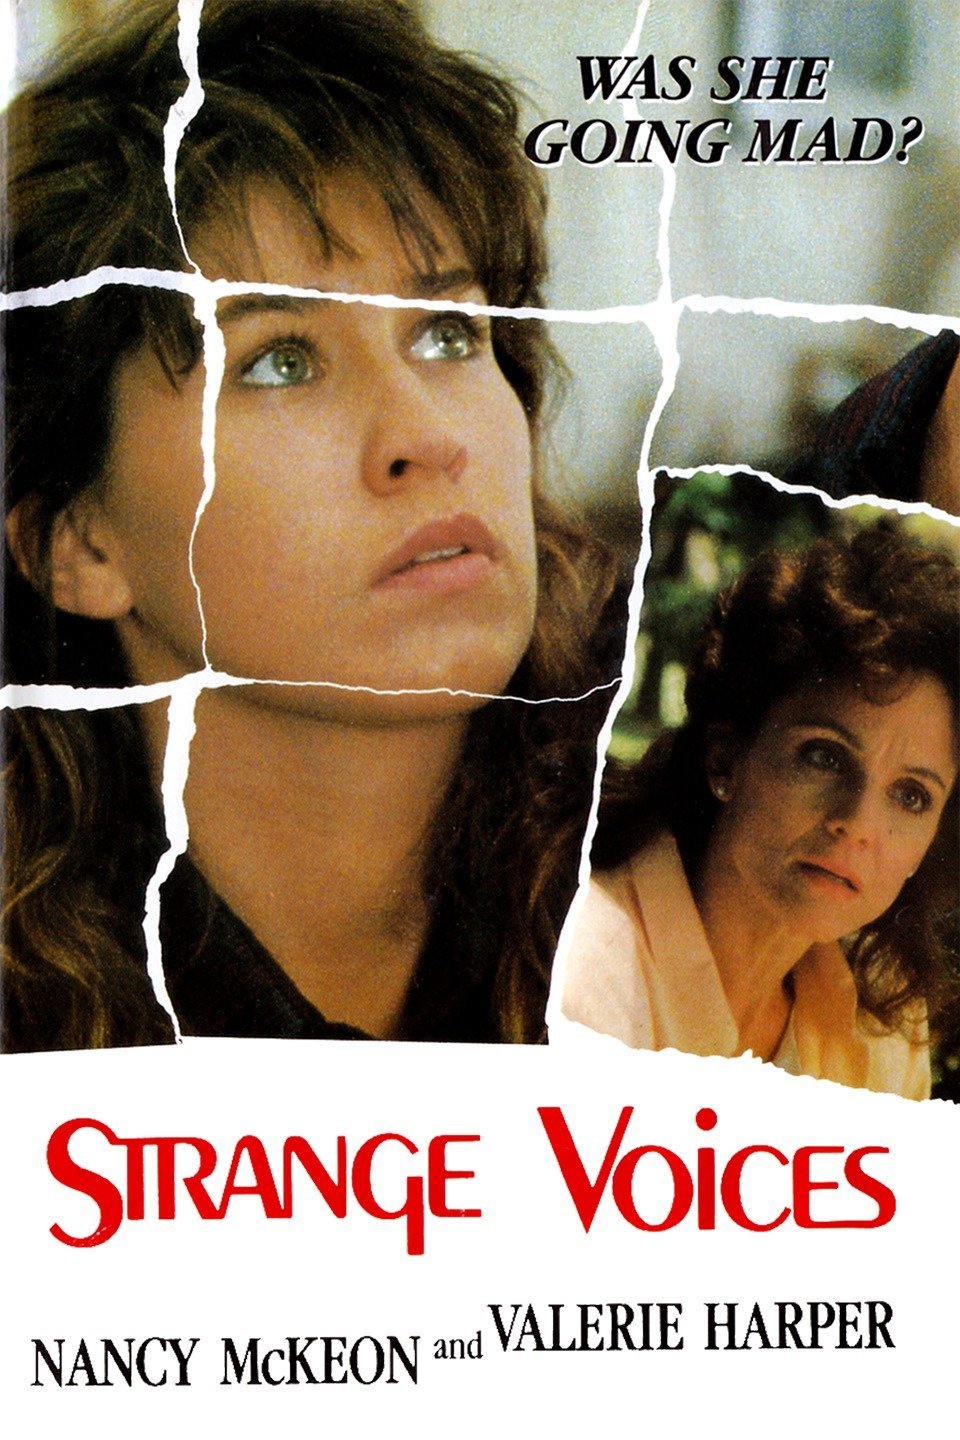 Poster of the movie Strange Voices